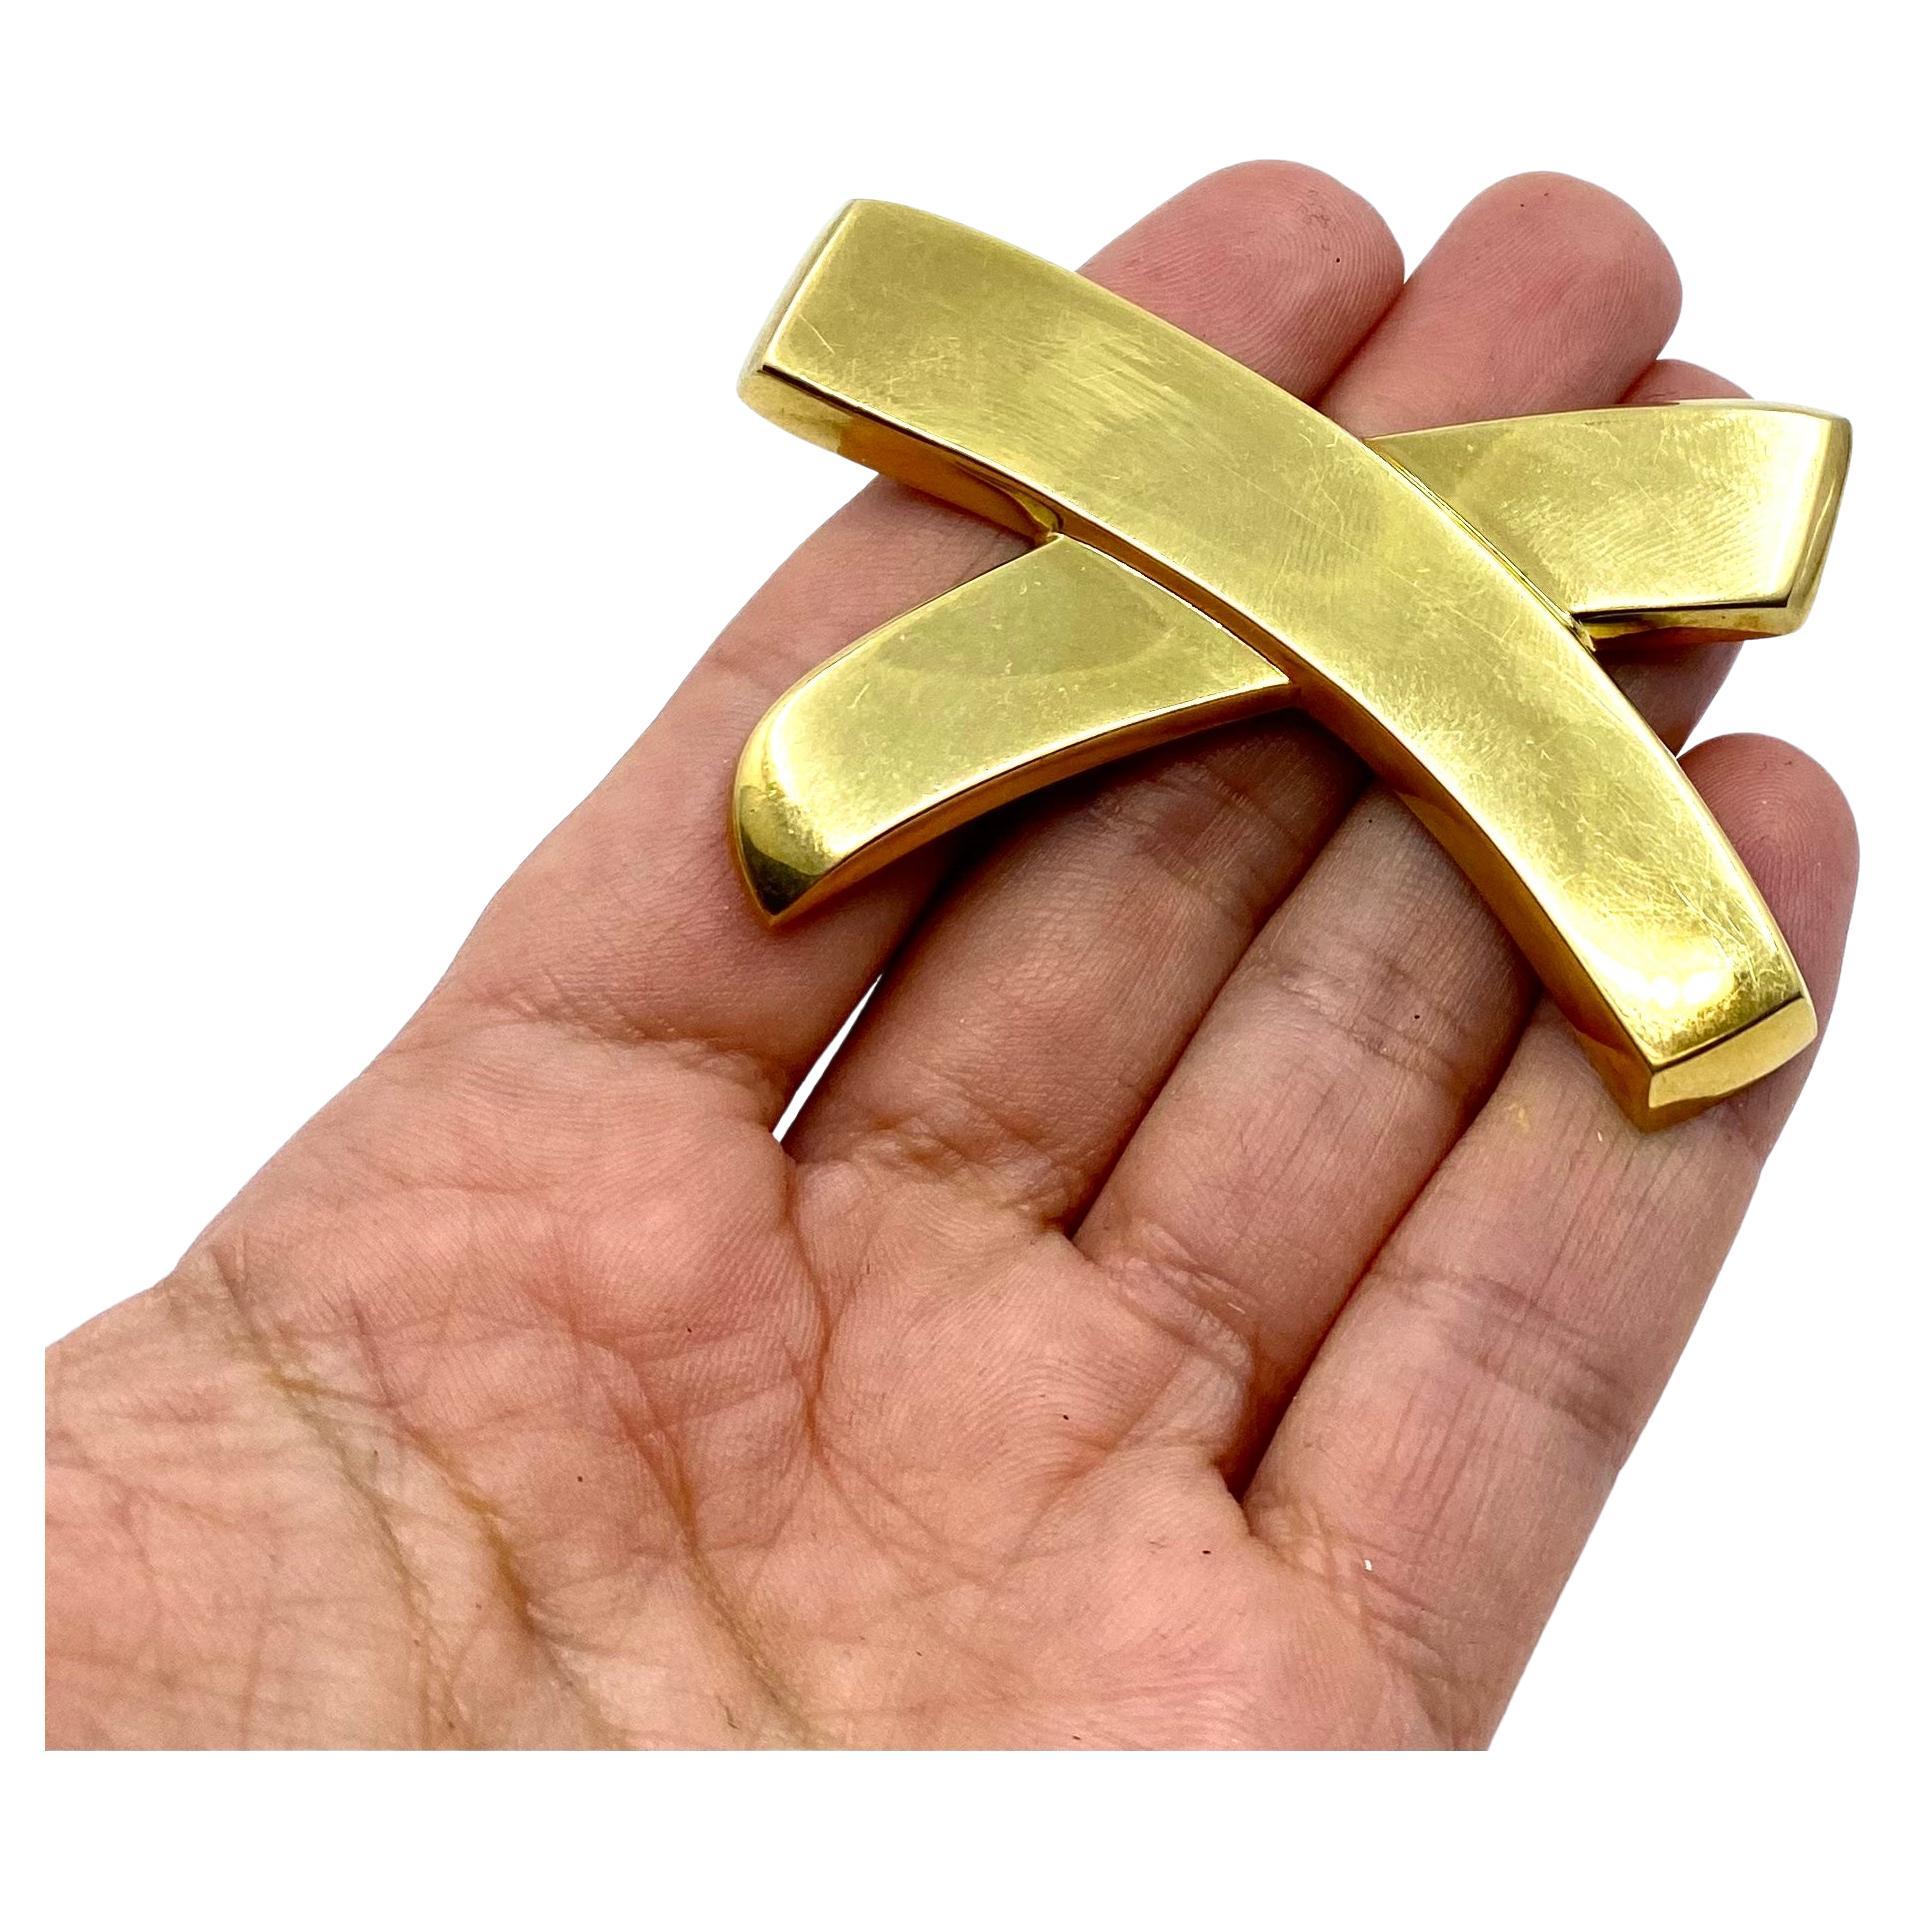 DESIGNER: Paloma Picasso for Tiffany & Co.
CIRCA: 1980s
MATERIALS: 18k Yellow Gold
WEIGHT: 27.4 grams
MEASUREMENT: 1 5/8